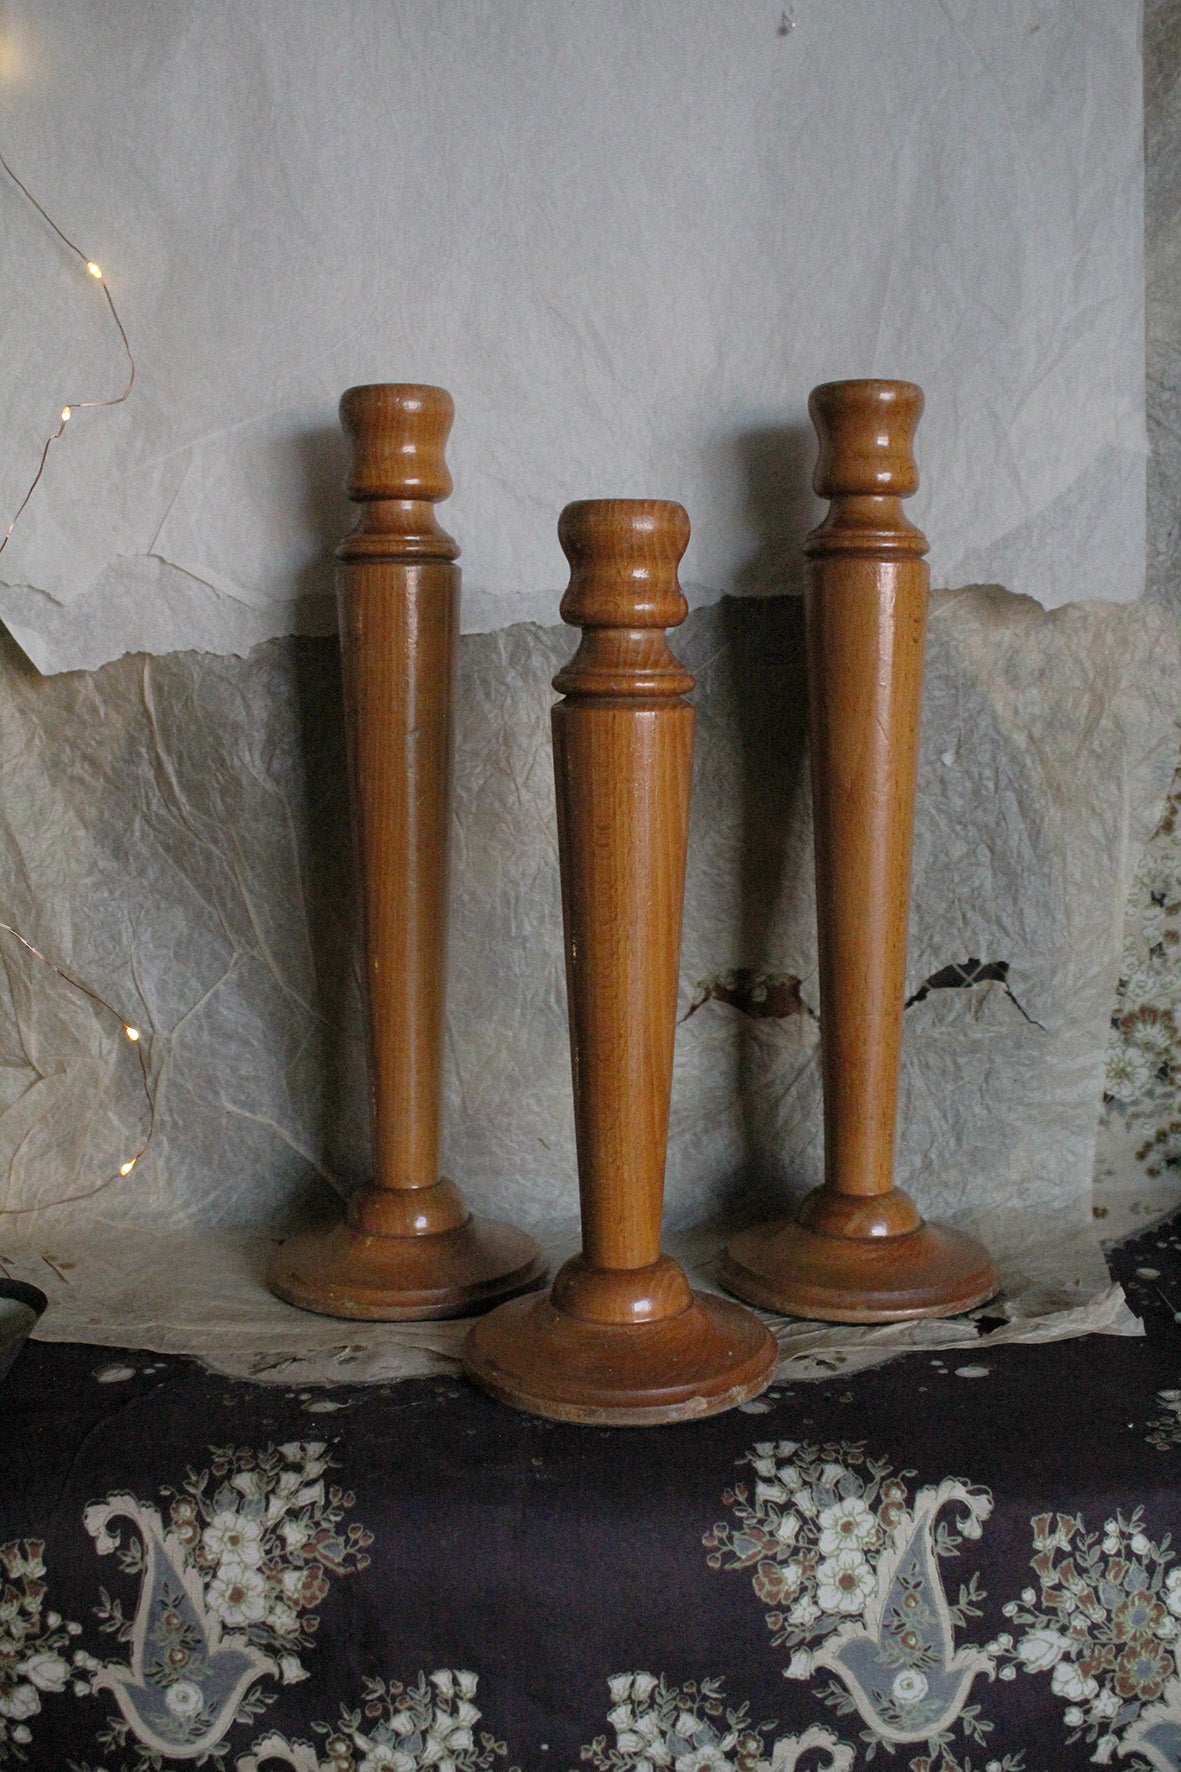 Trio of Large Wooden Candlesticks